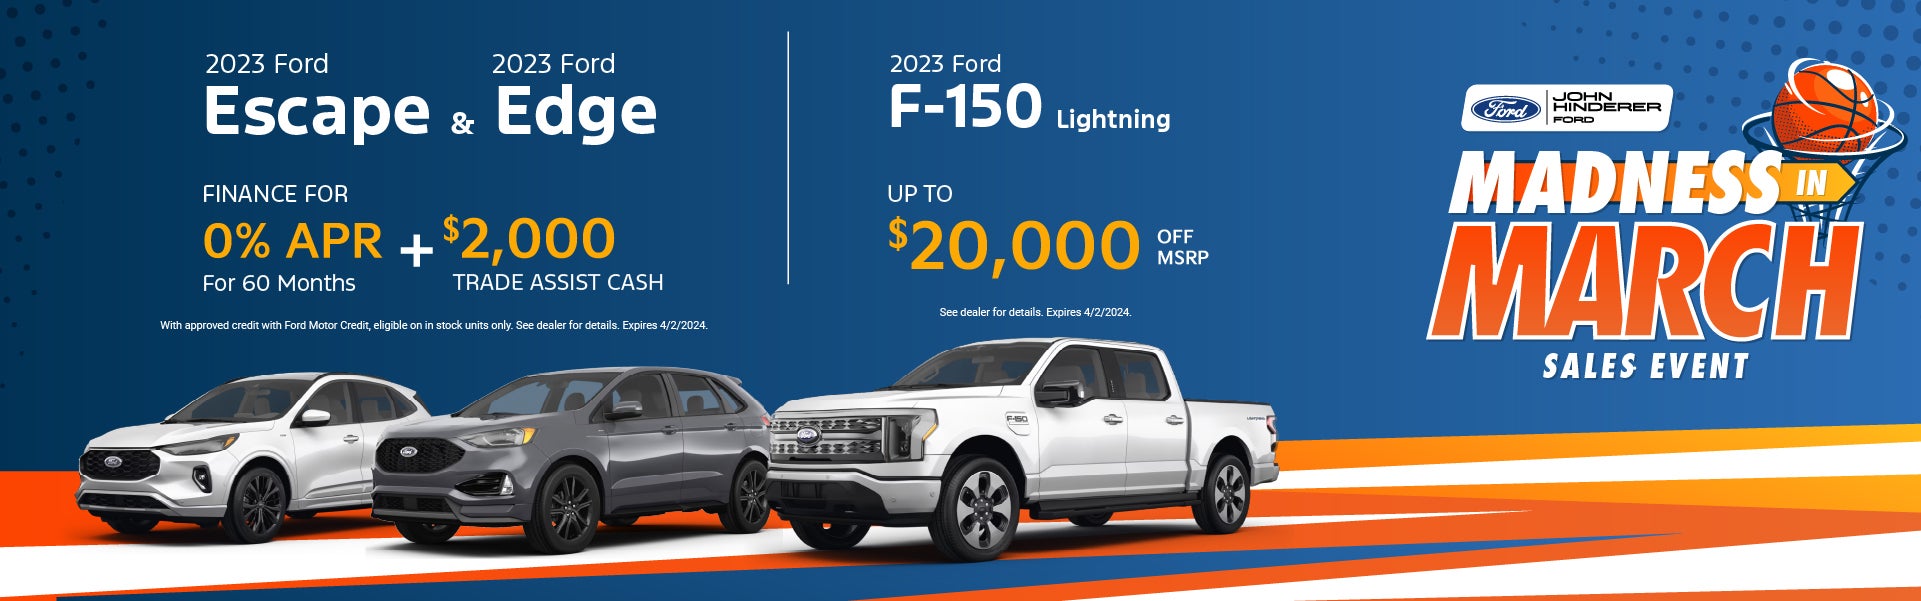 Savings on 2023 Excapes, Edges, and F-150 Lightnings